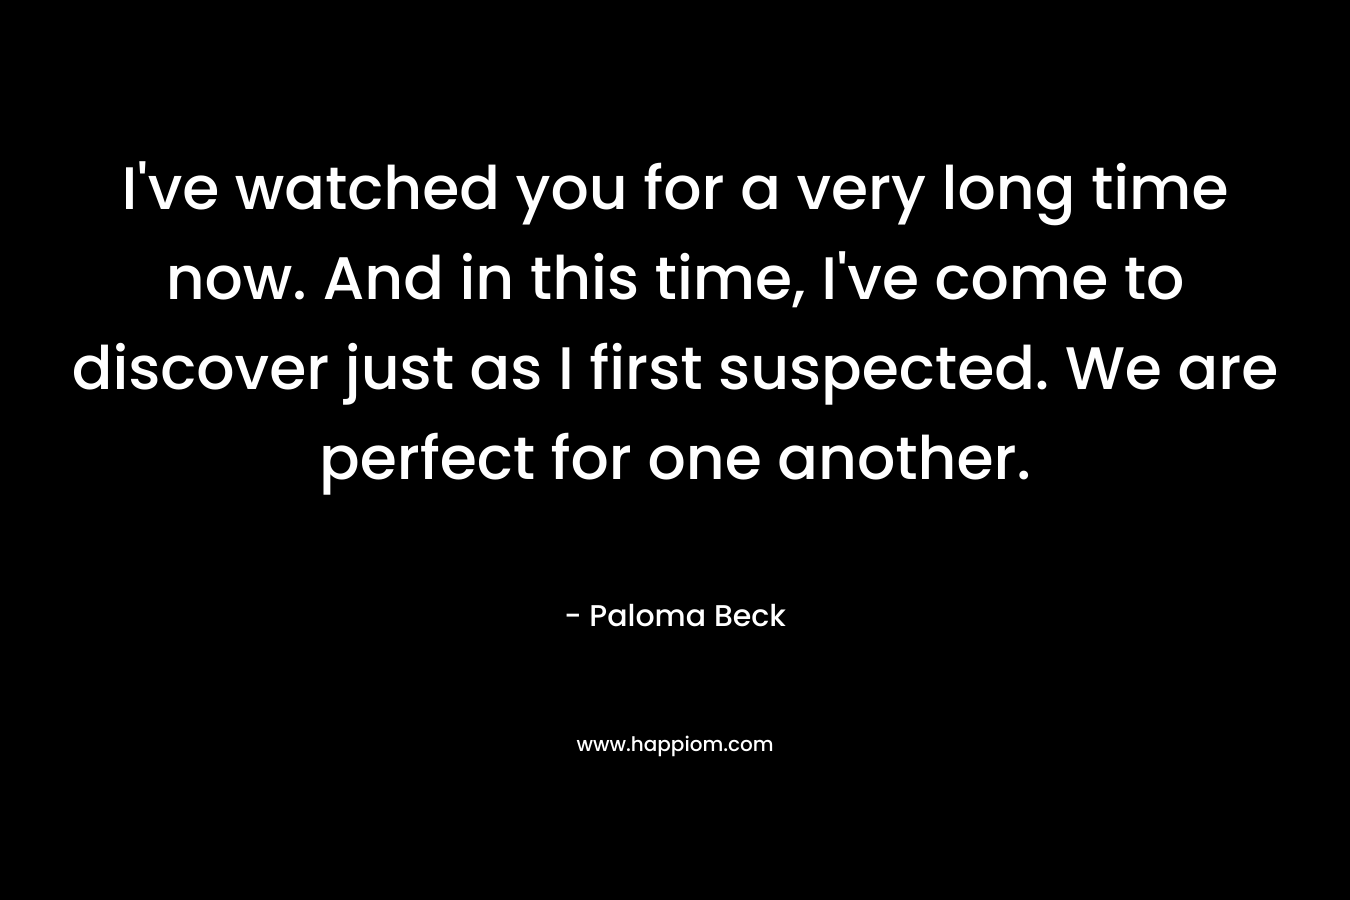 I’ve watched you for a very long time now. And in this time, I’ve come to discover just as I first suspected. We are perfect for one another. – Paloma Beck